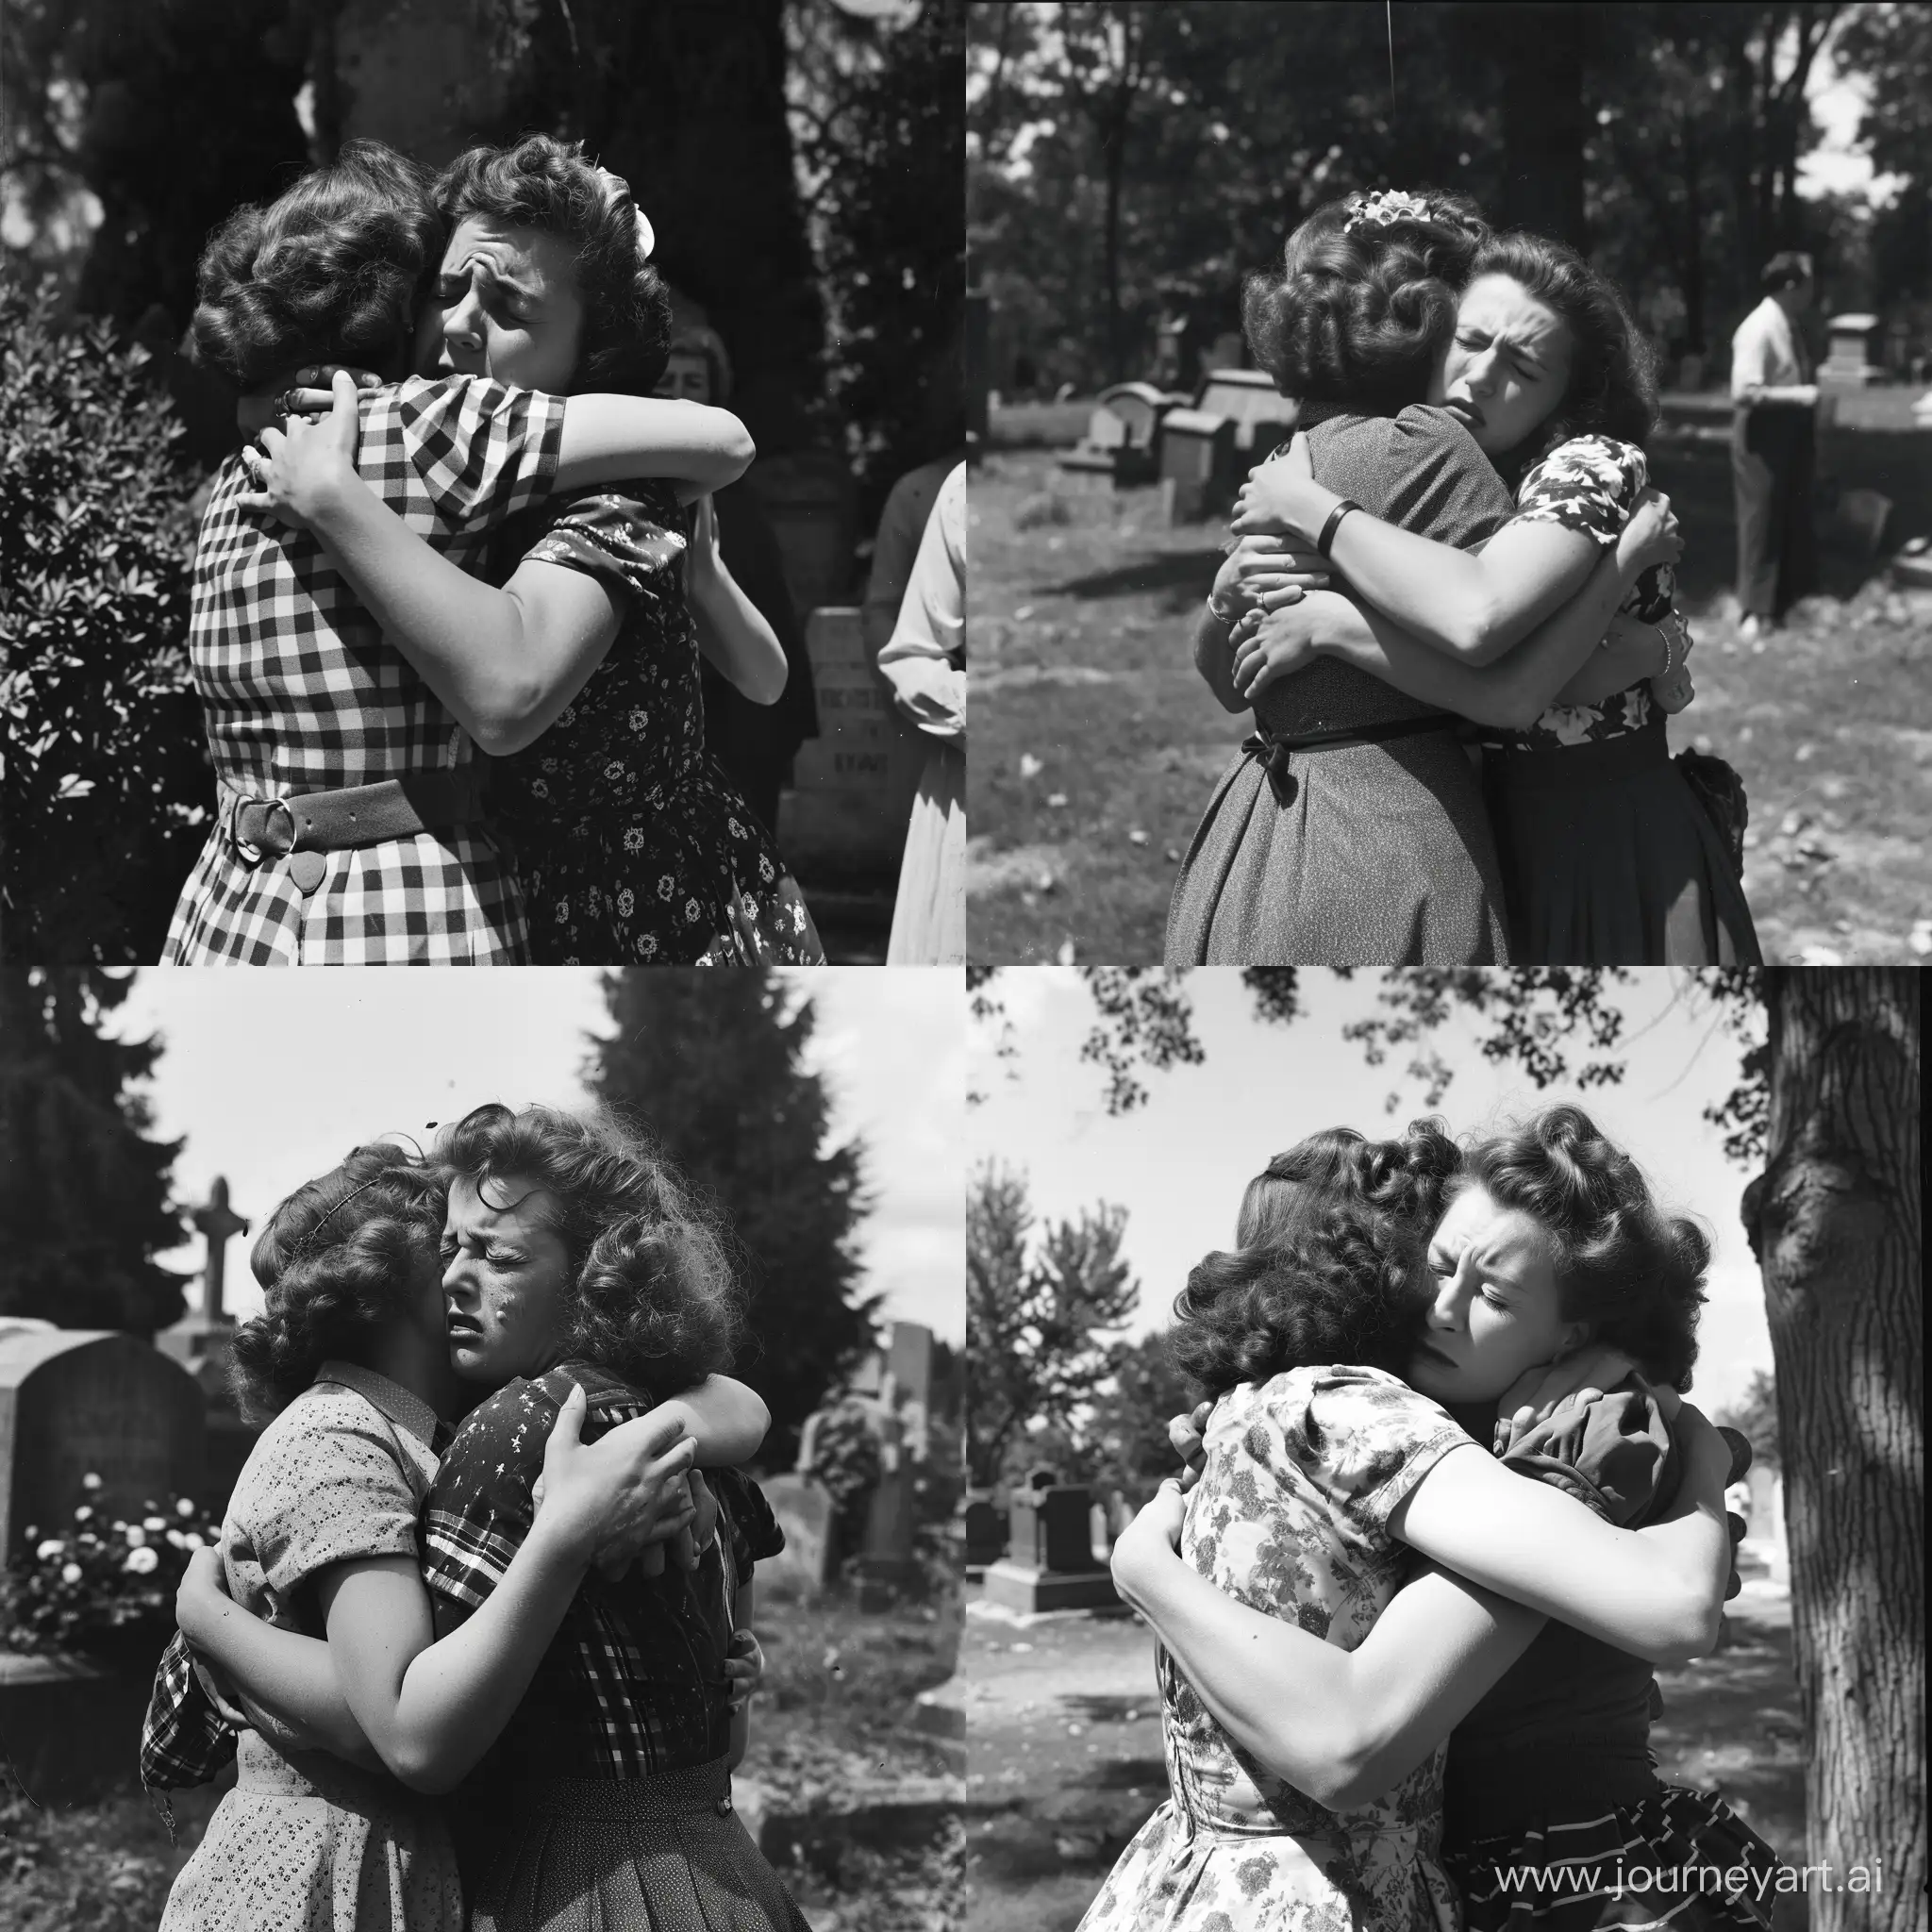 Lesbian-European-French-1950s-Photo-Emotional-Cemetery-Hug-and-Kiss